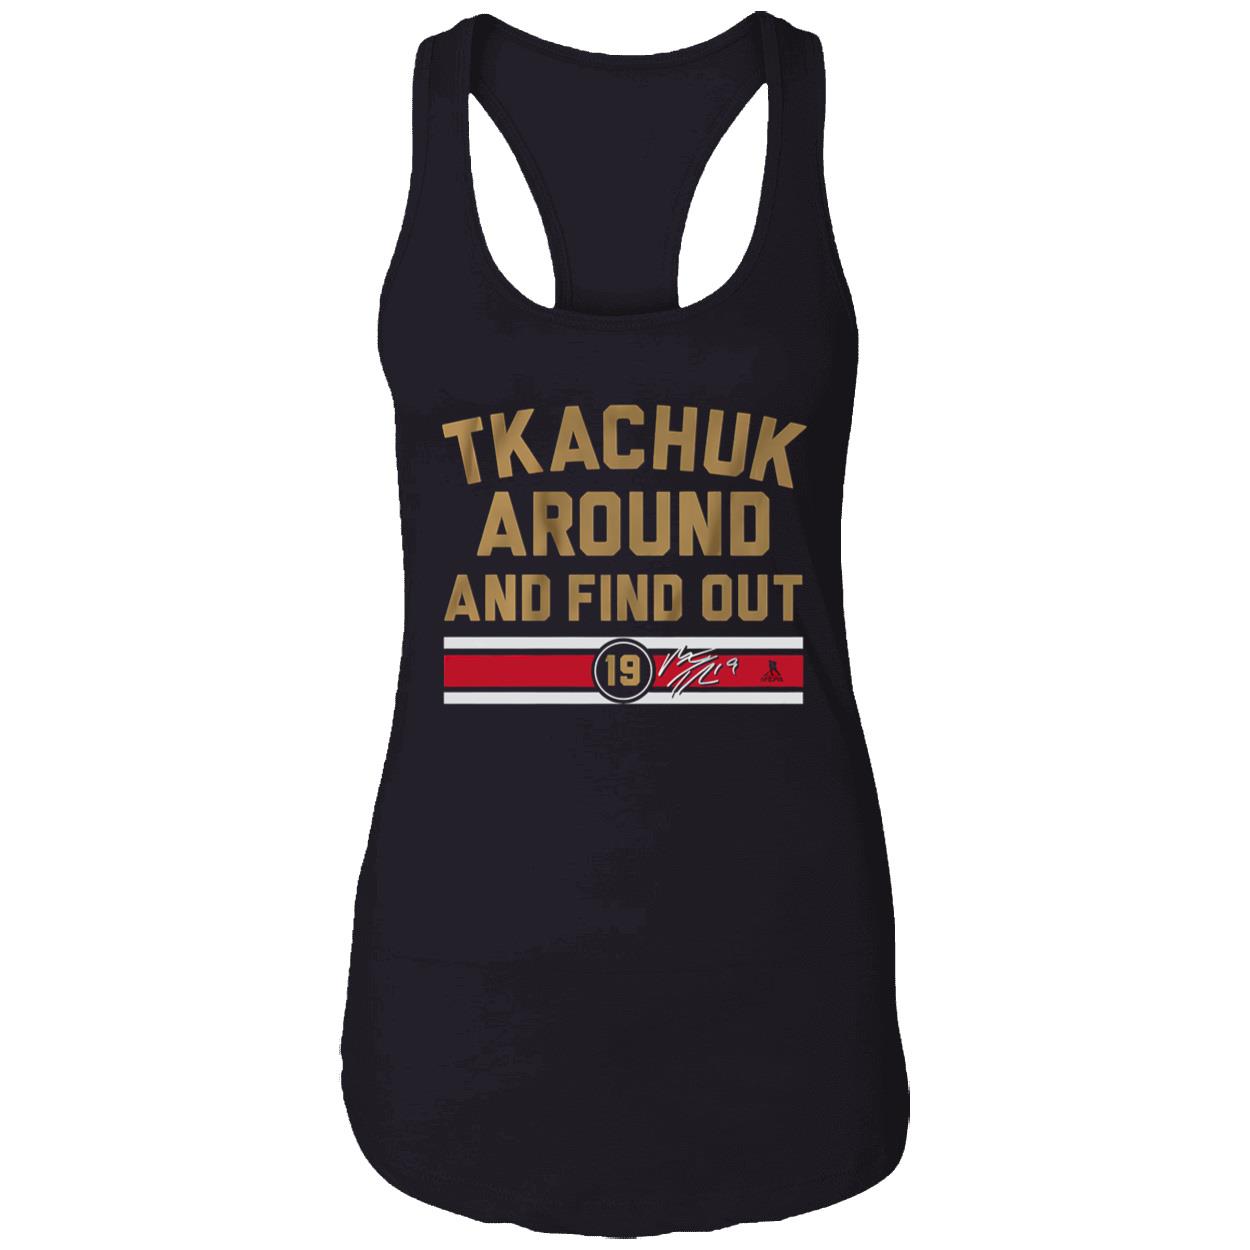 Tkachuk Around And Find Out Shirt